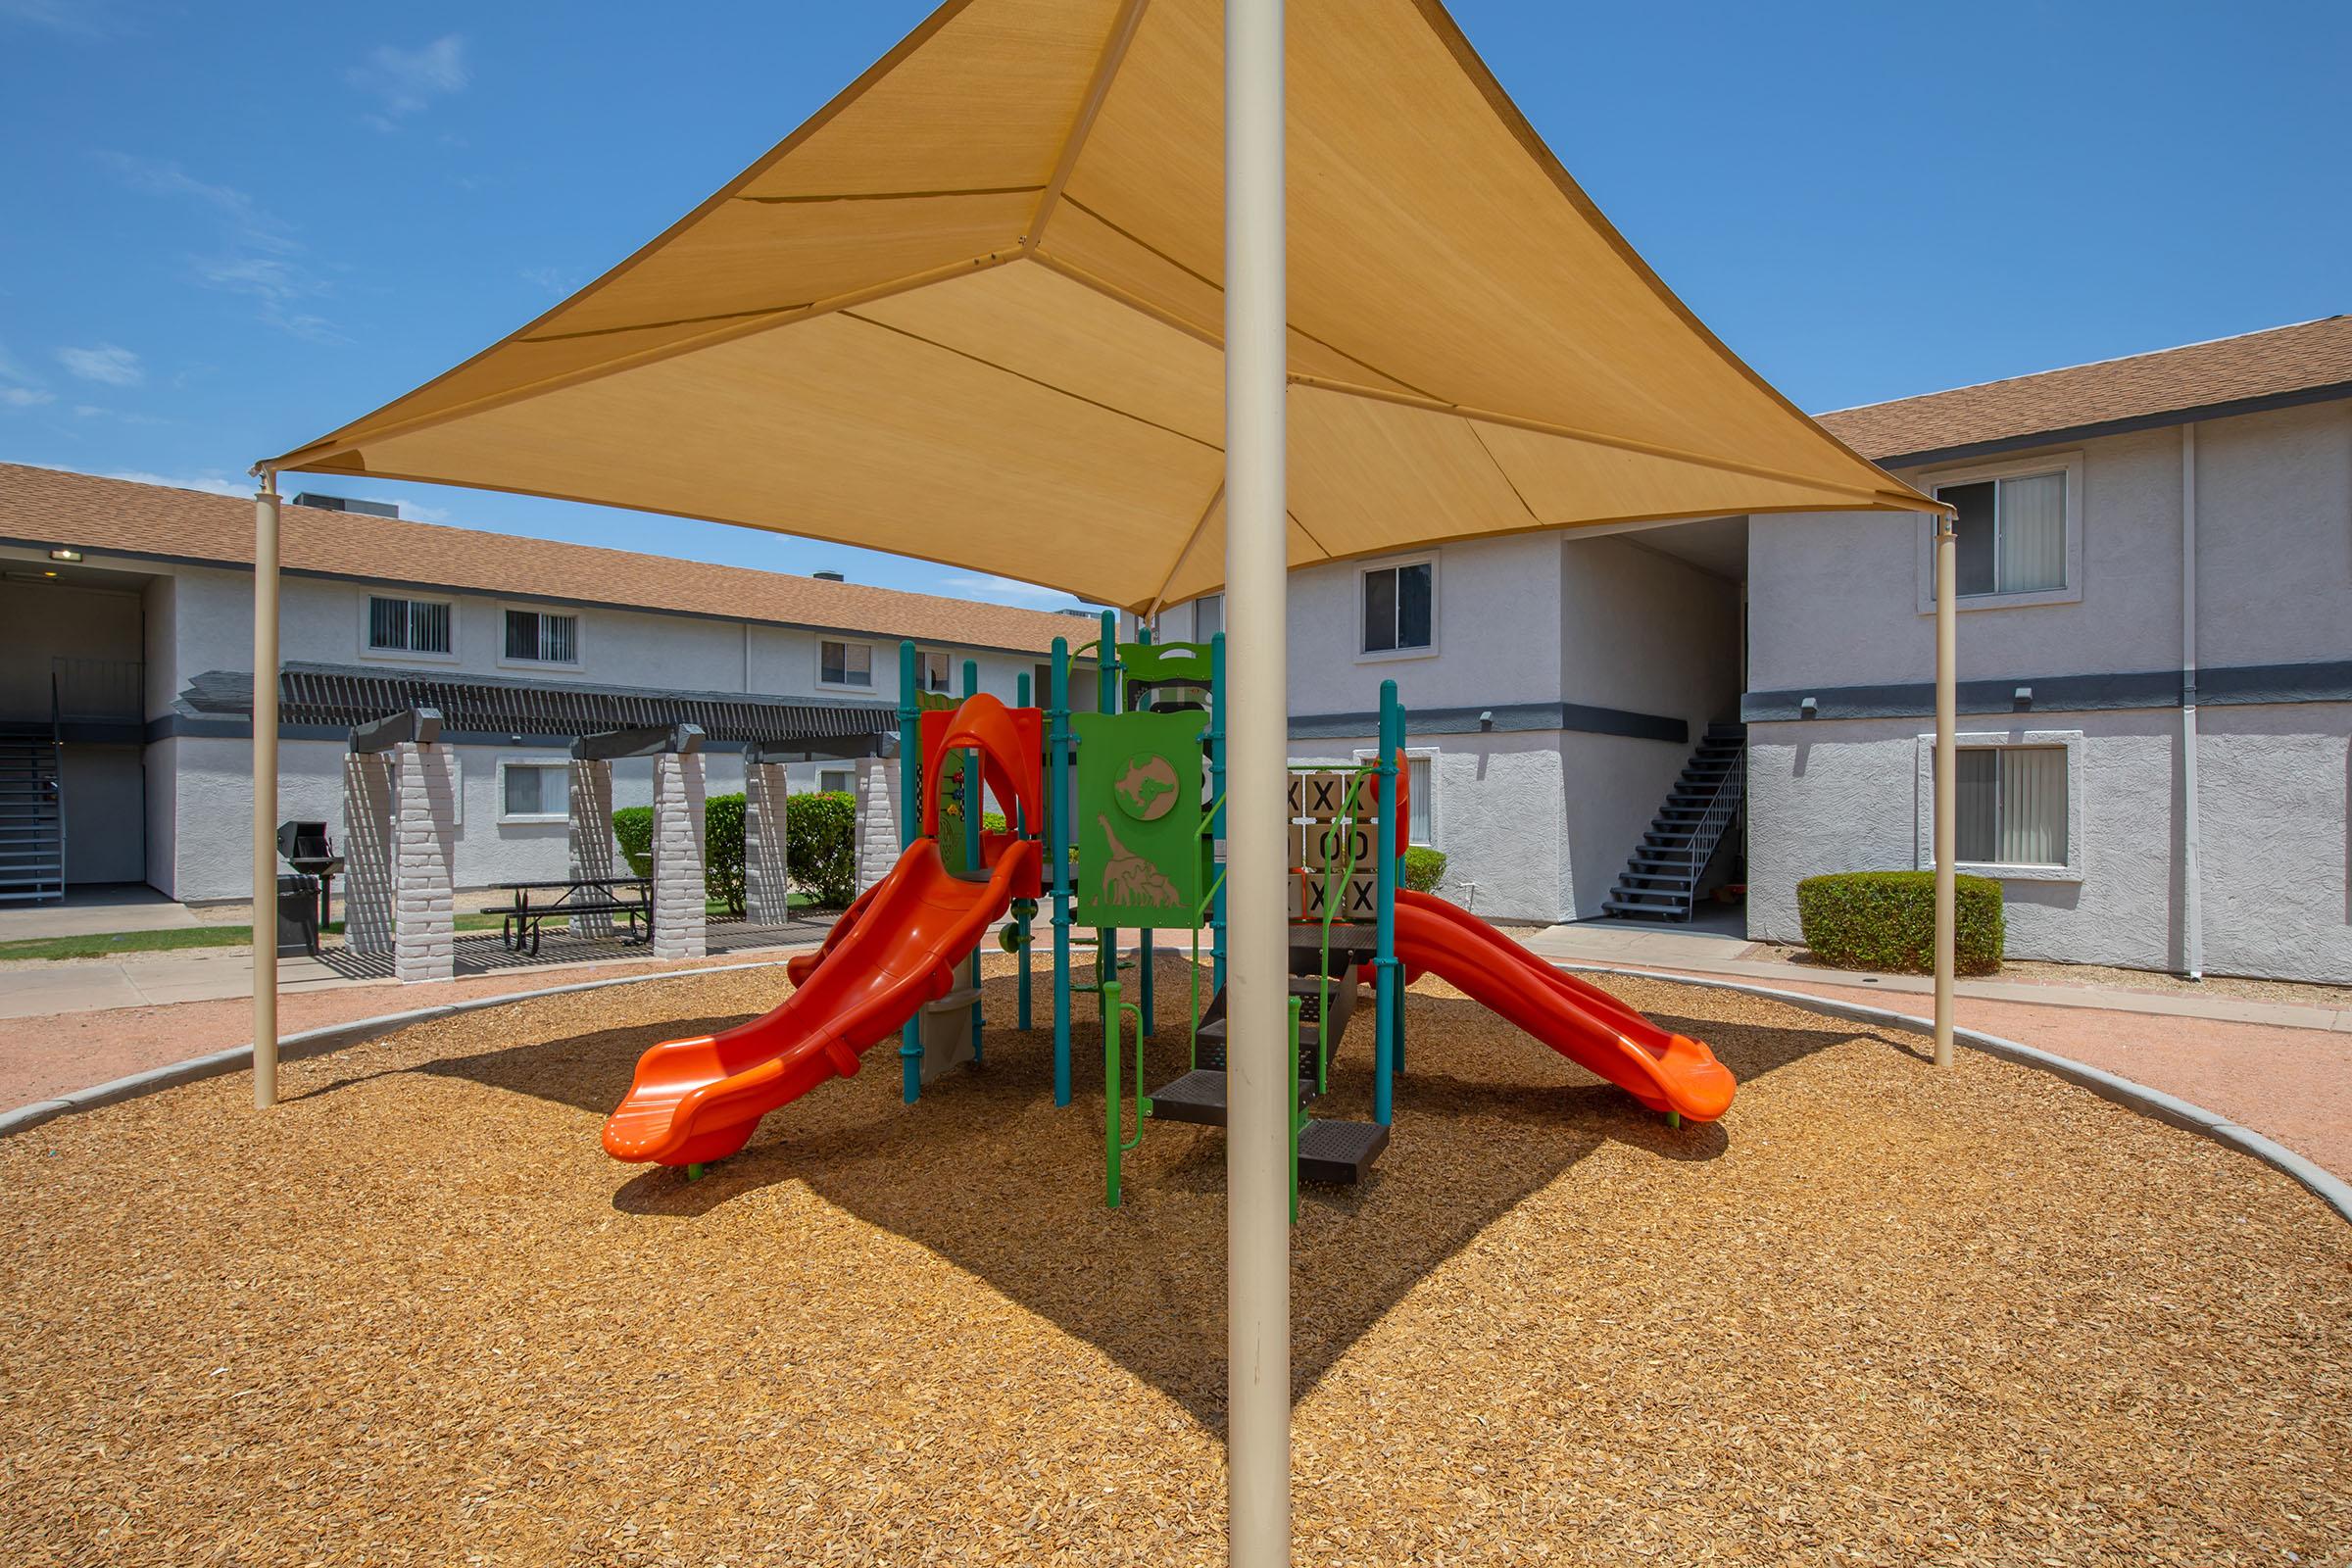 Rise at the District apartments outdoor playground set with large orange slides and sunshade covering